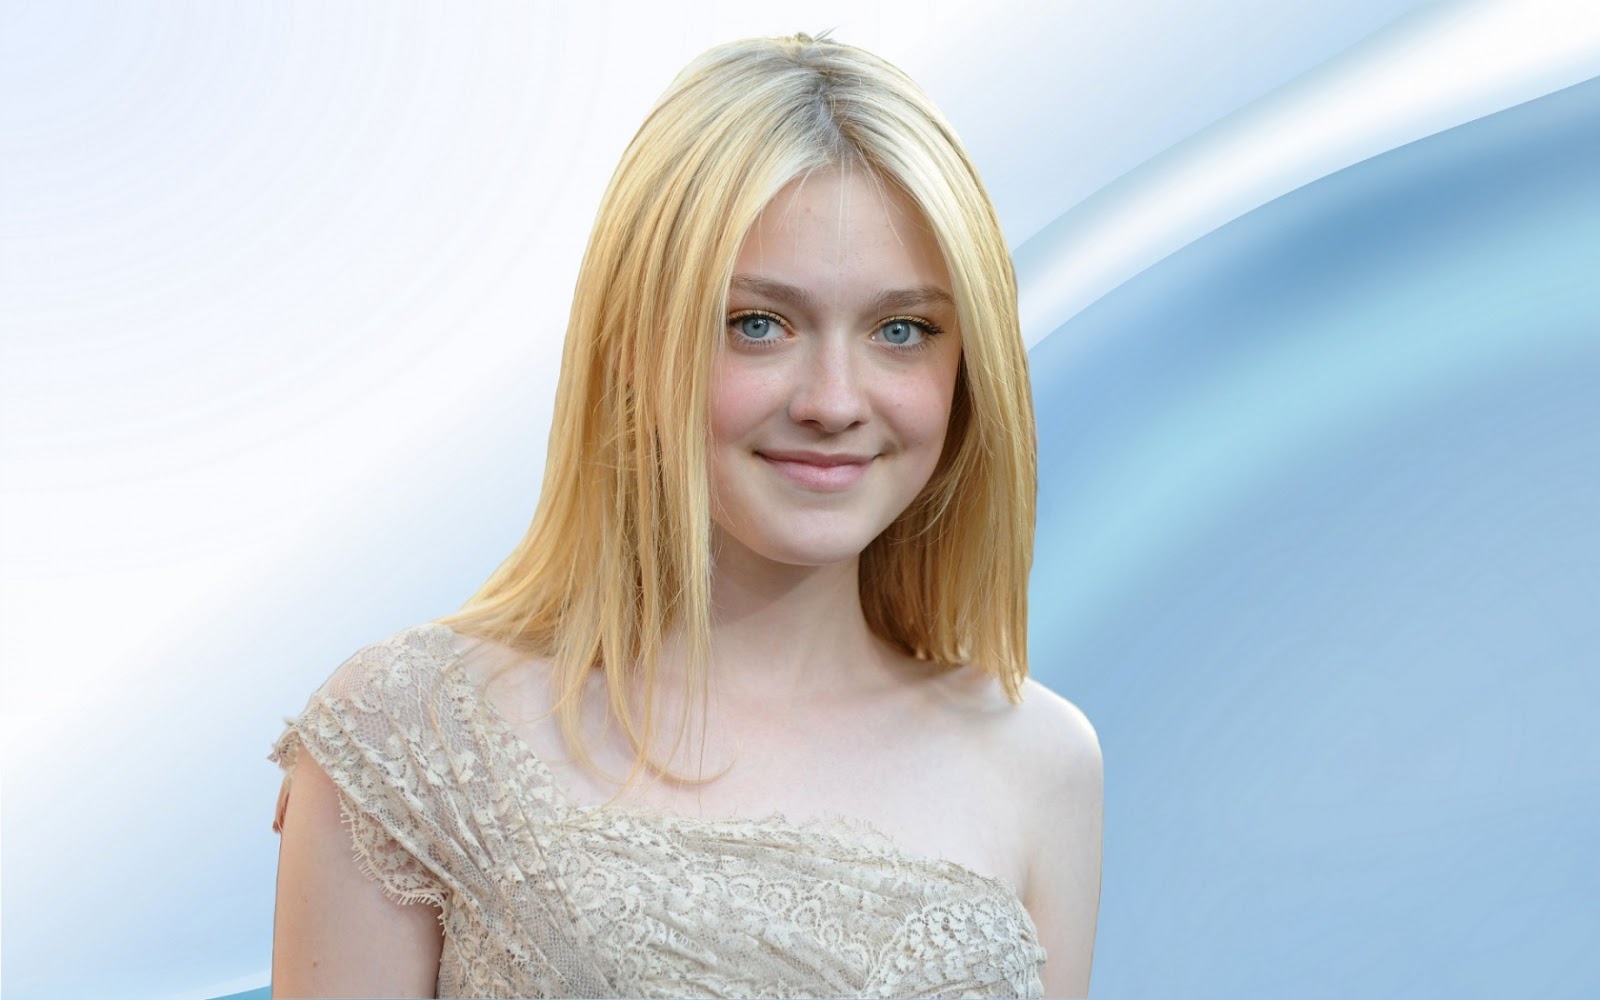 hollywood hot actress hd wallpapers,hair,blond,face,hairstyle,skin